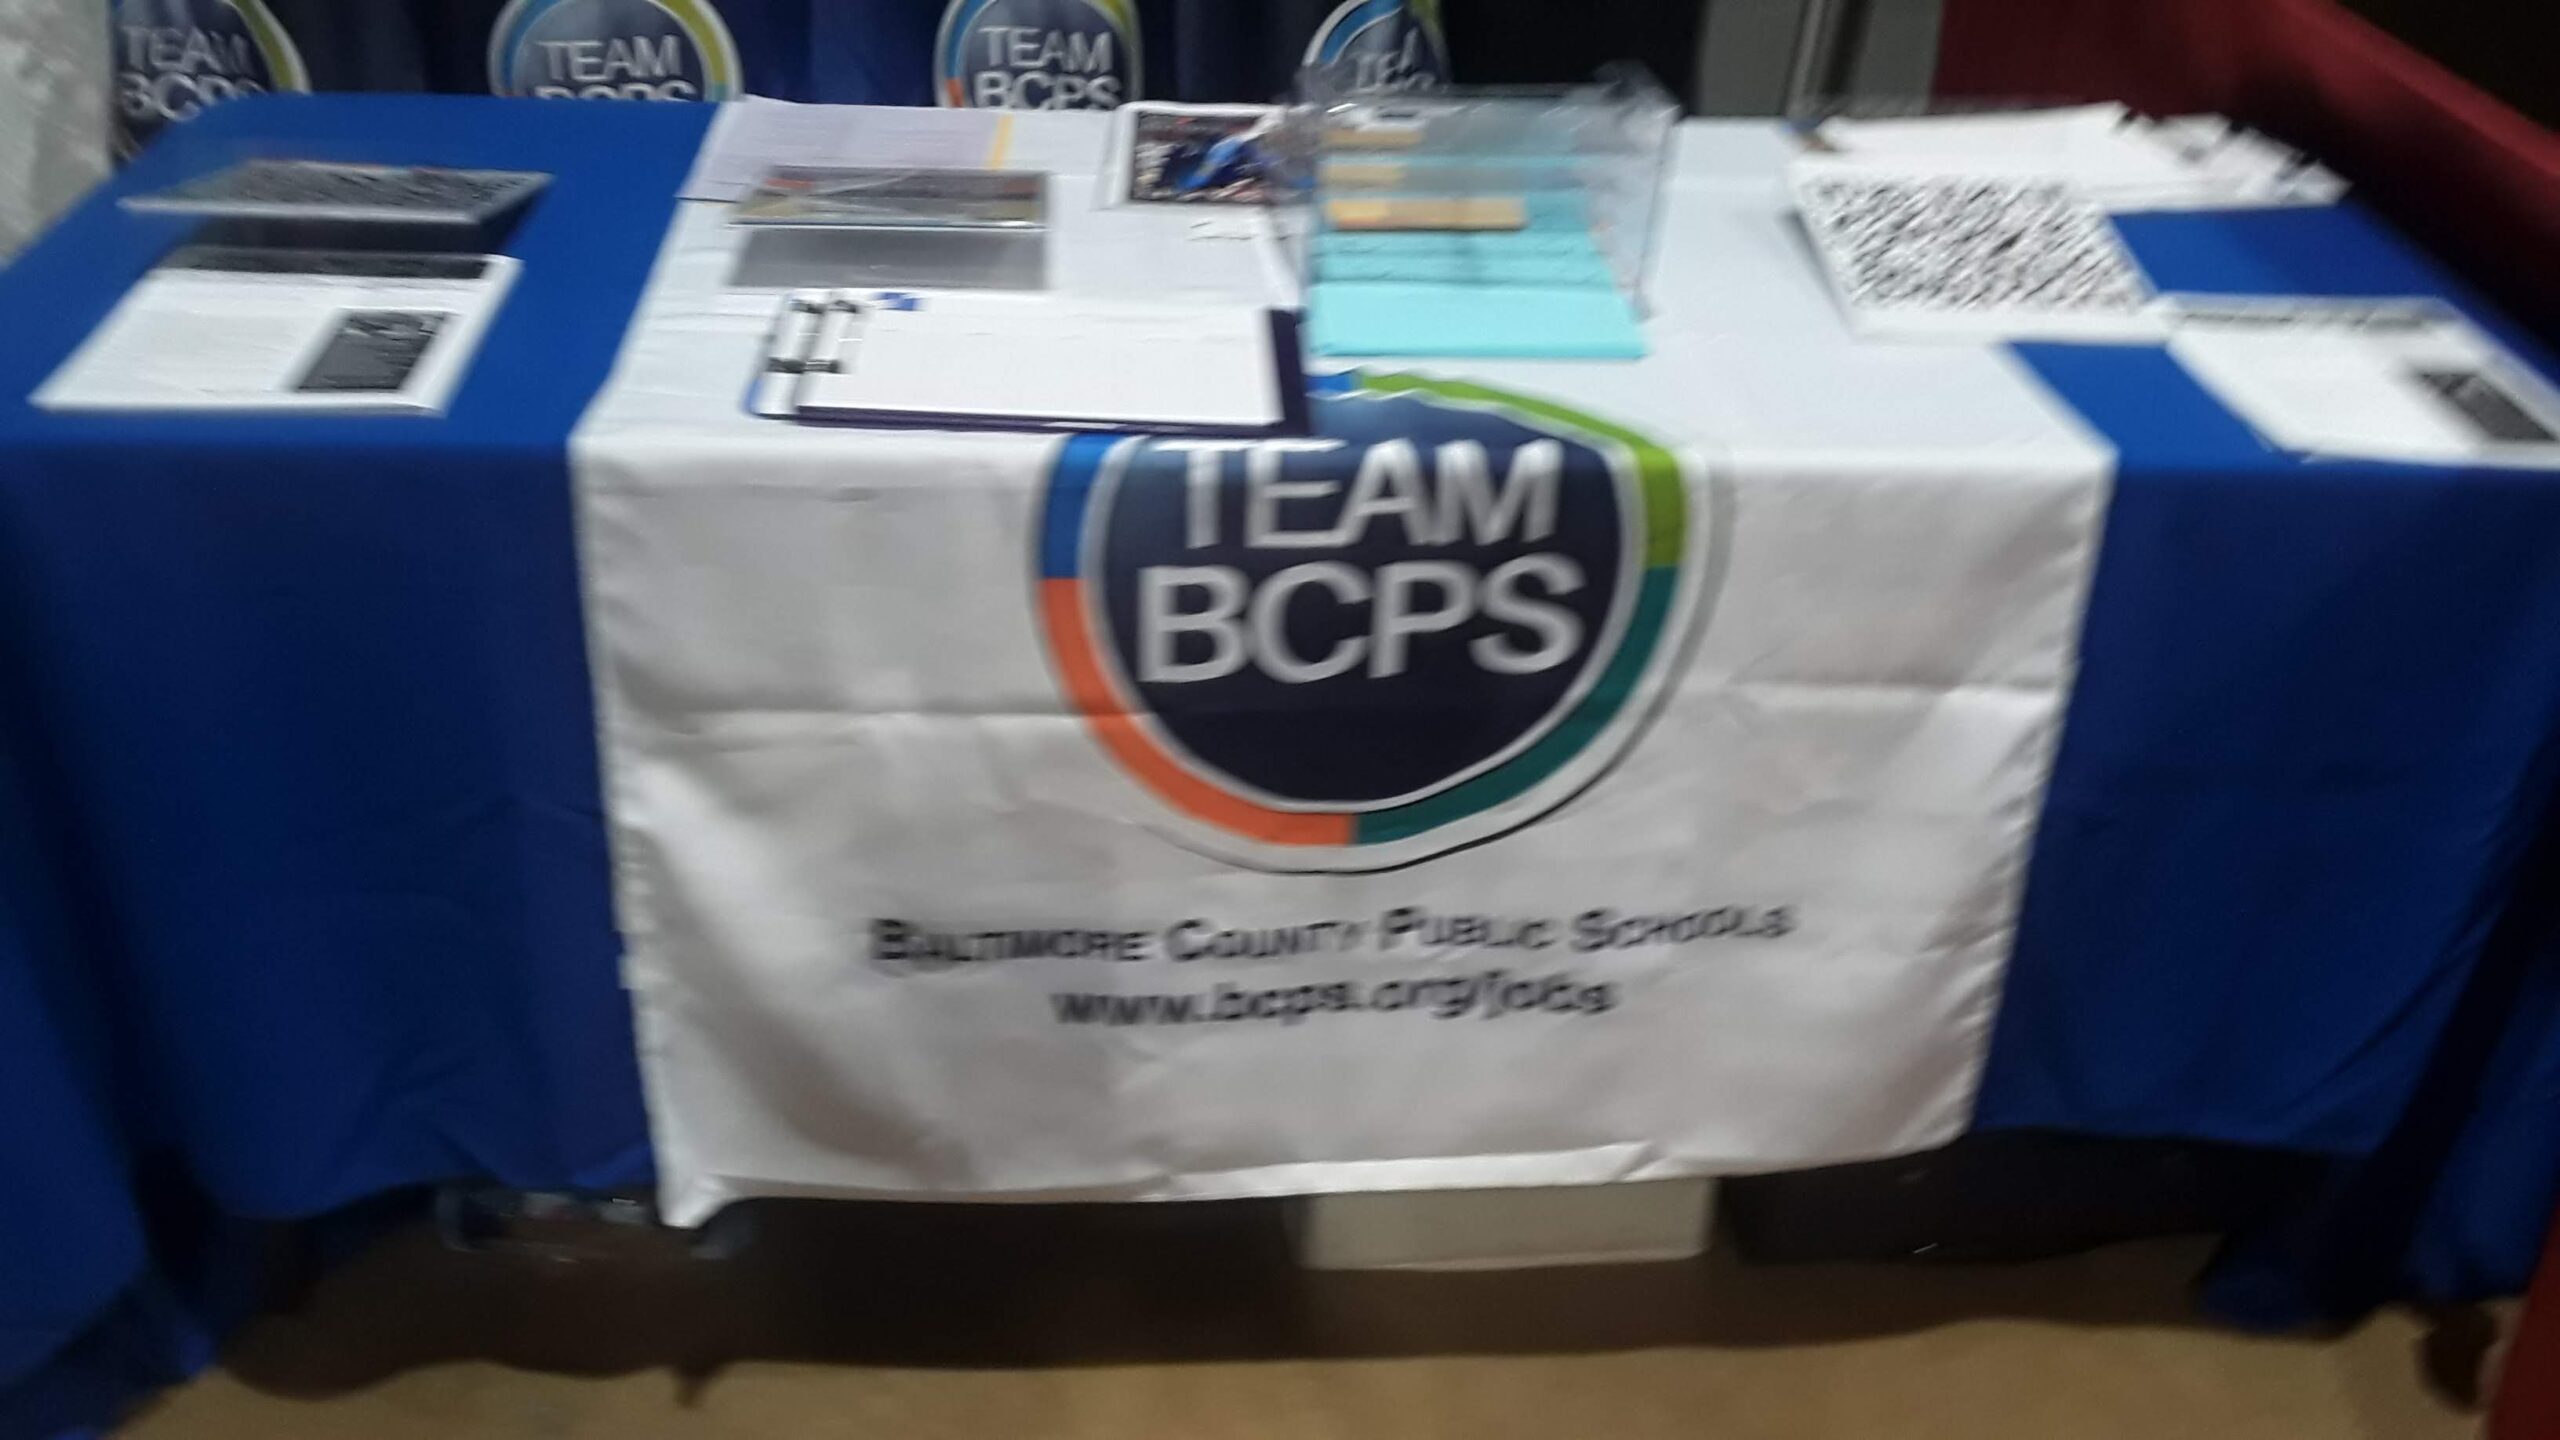 Team BCPS Day to be Held on Jan. 12